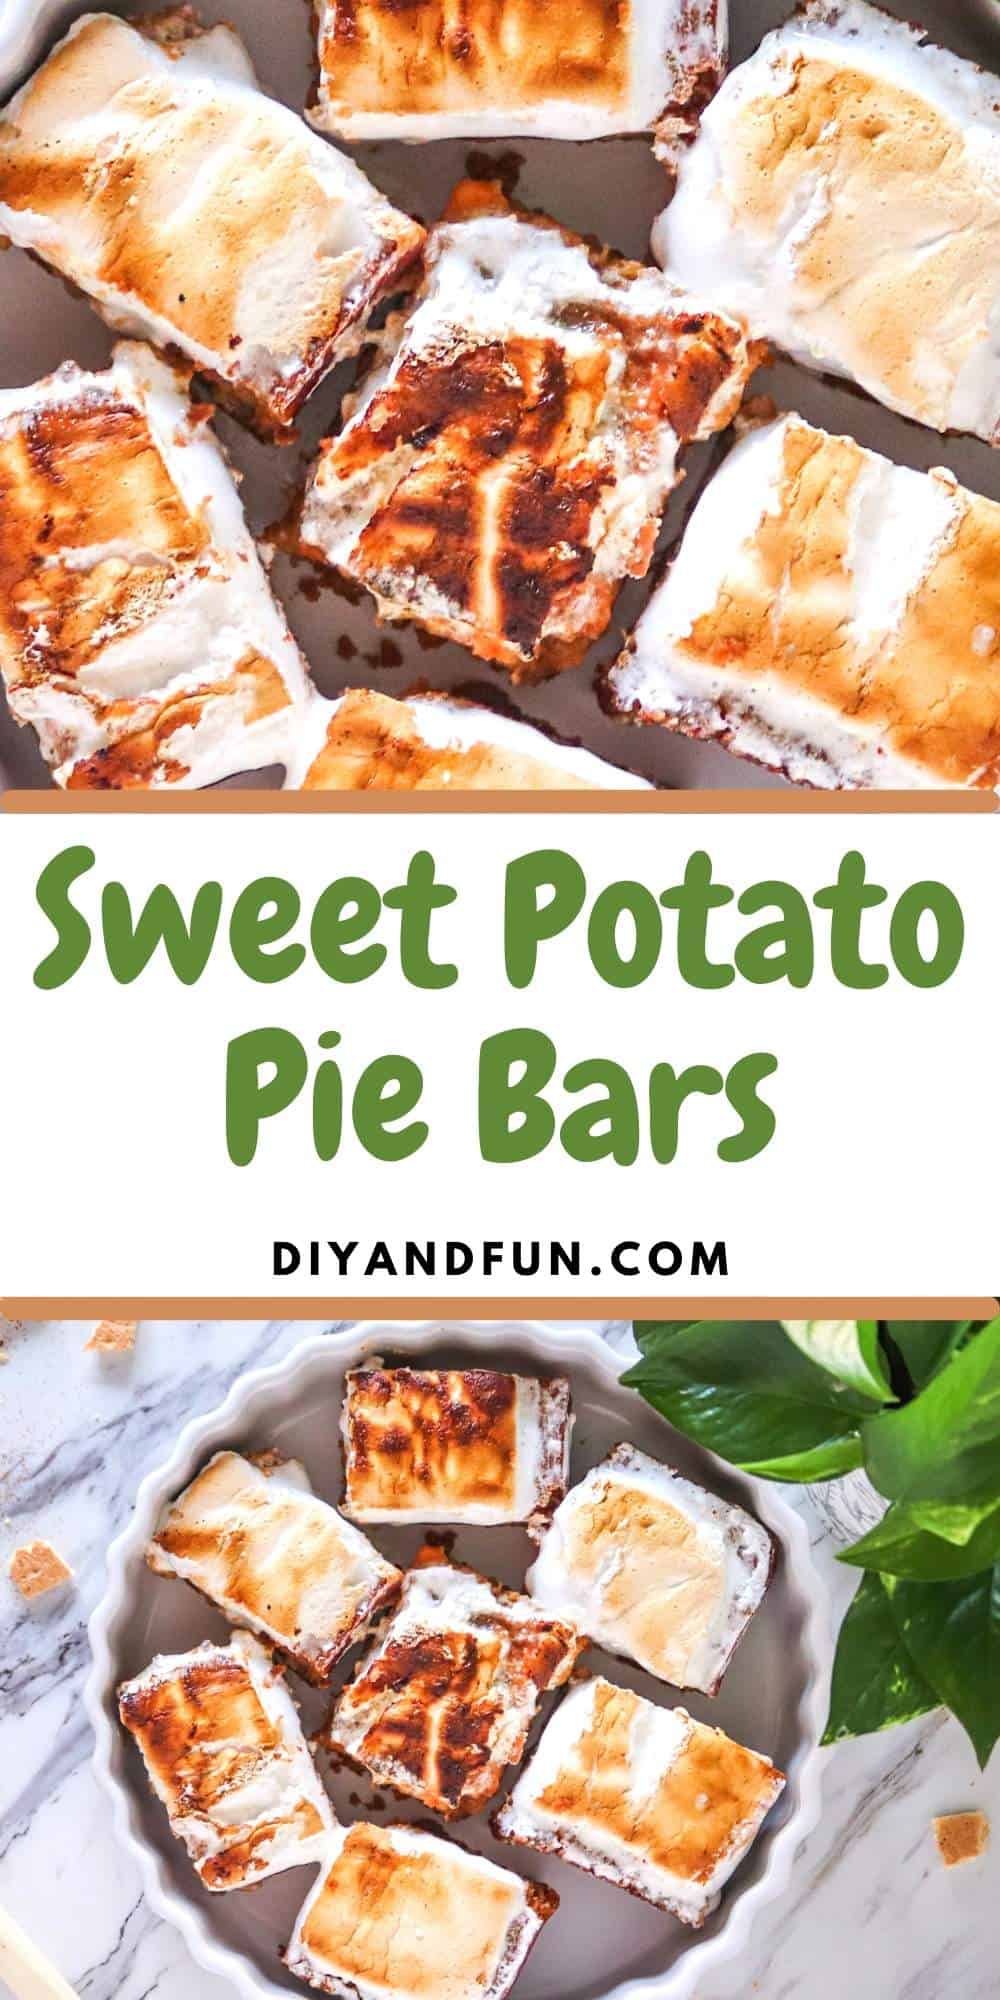 Tasty Sweet Potato Pie Bars, a simple dessert recipe made with sweet potatoes, a graham cracker crust and topped with marshmallows.